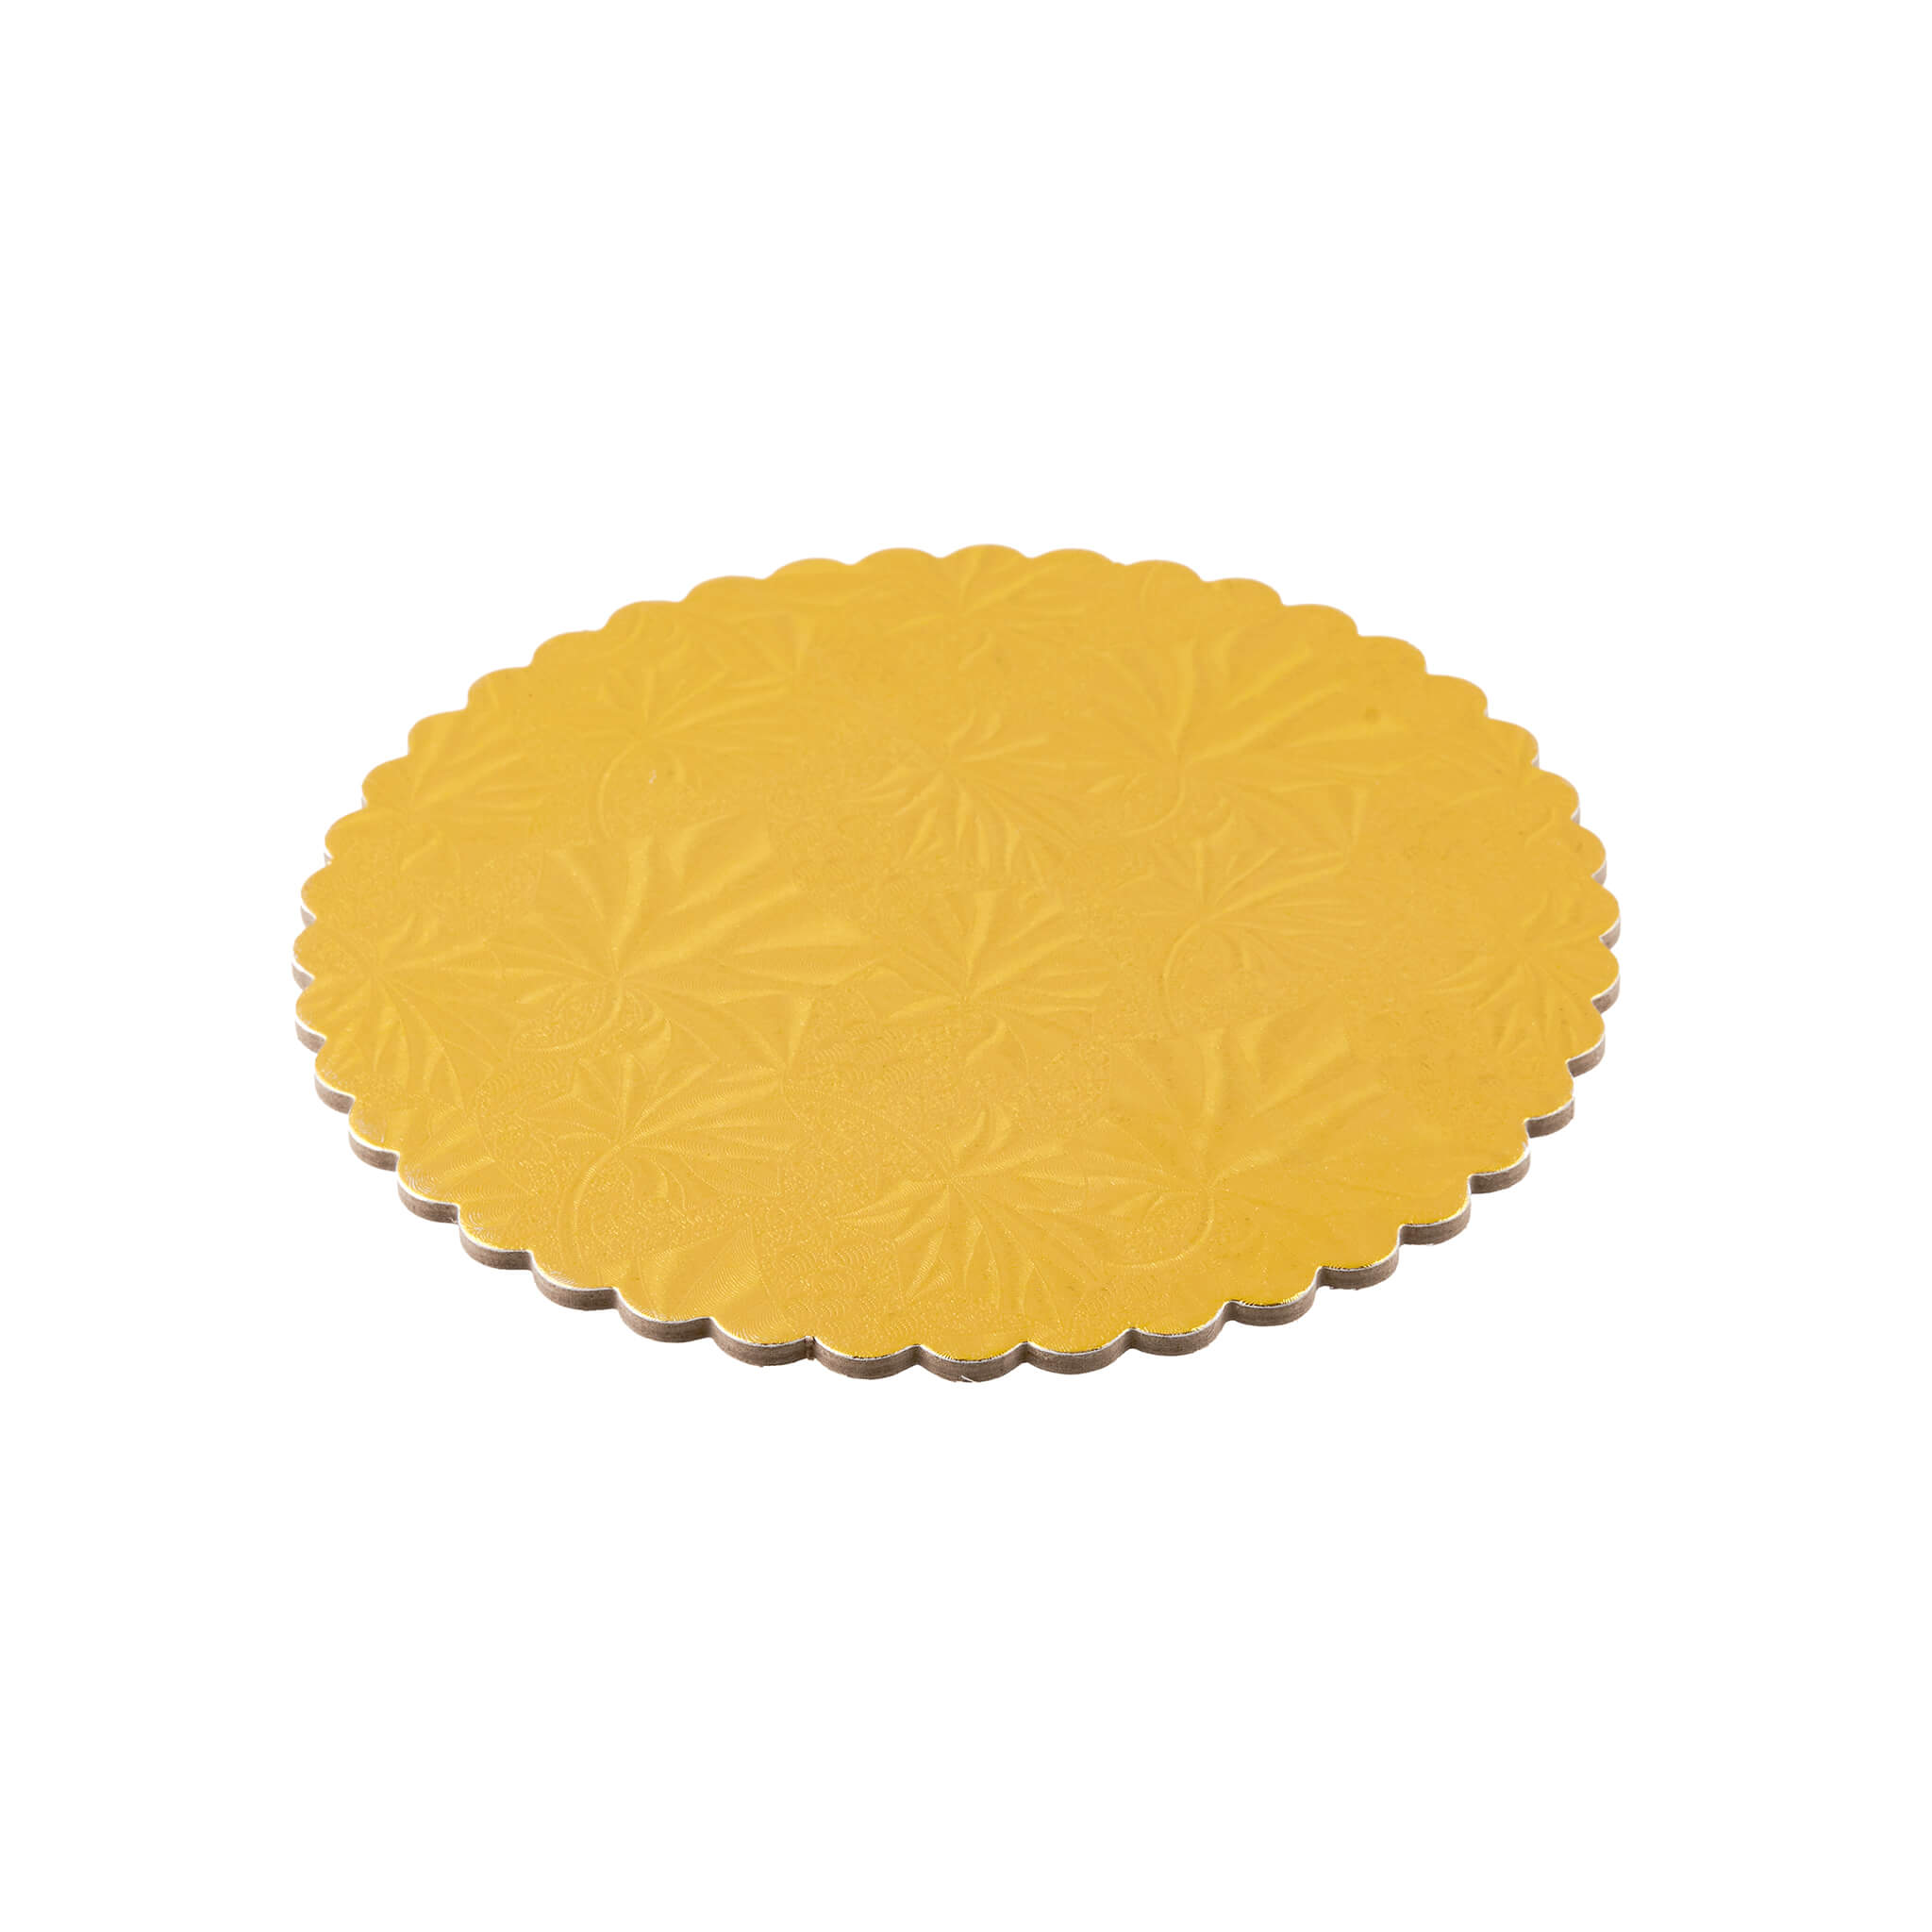 Gold Round Cake Board 5 Pieces - Hotpack Global